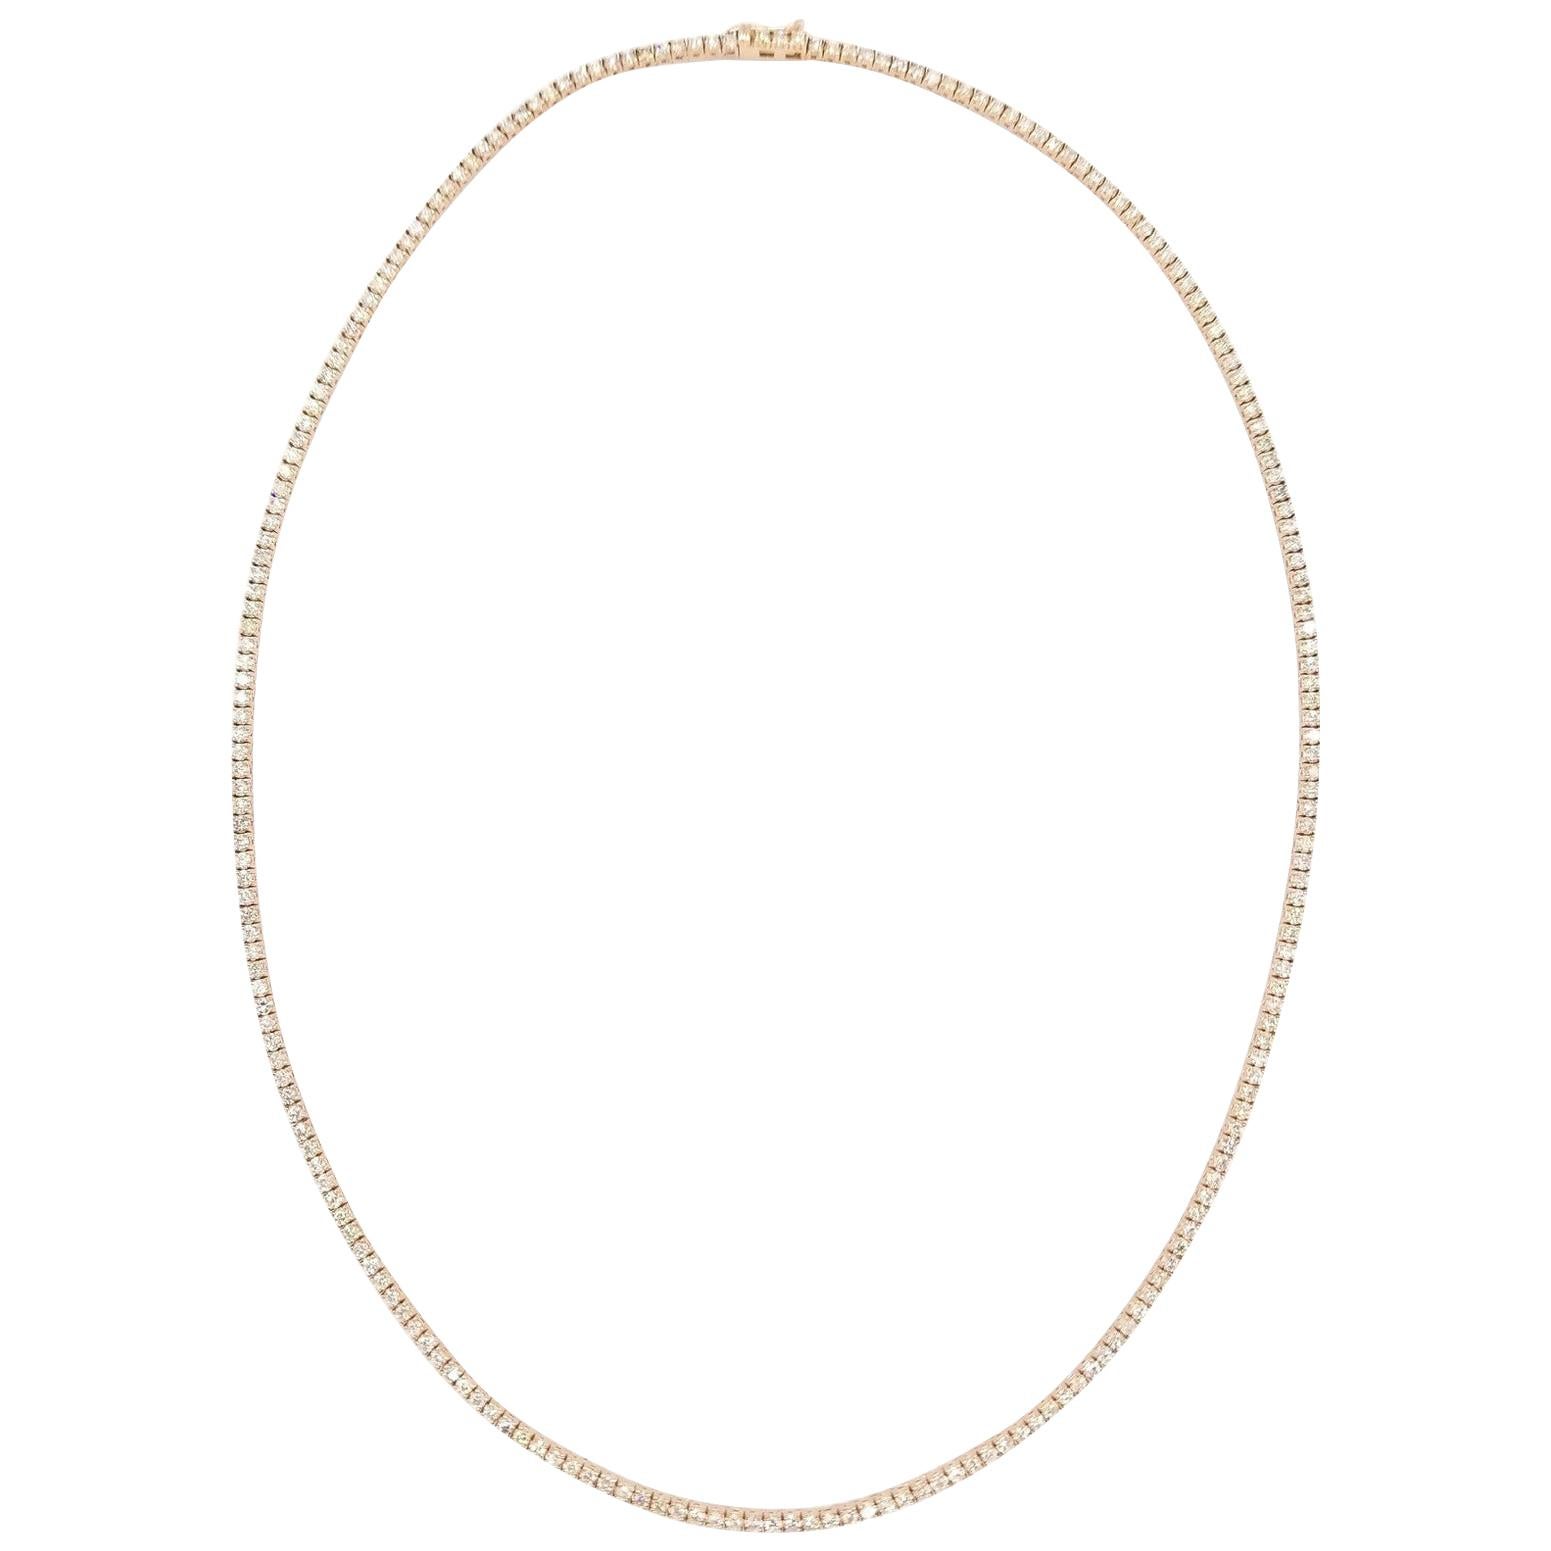 Brilliant and beautiful tennis necklace, natural round-brilliant cut white diamonds clean and Excellent shine. 14k rose gold classic four-prong style for maximum light brilliance. 21 inch length. Average H-I Color, SI Clarity. 2.2 mm. Elegance for